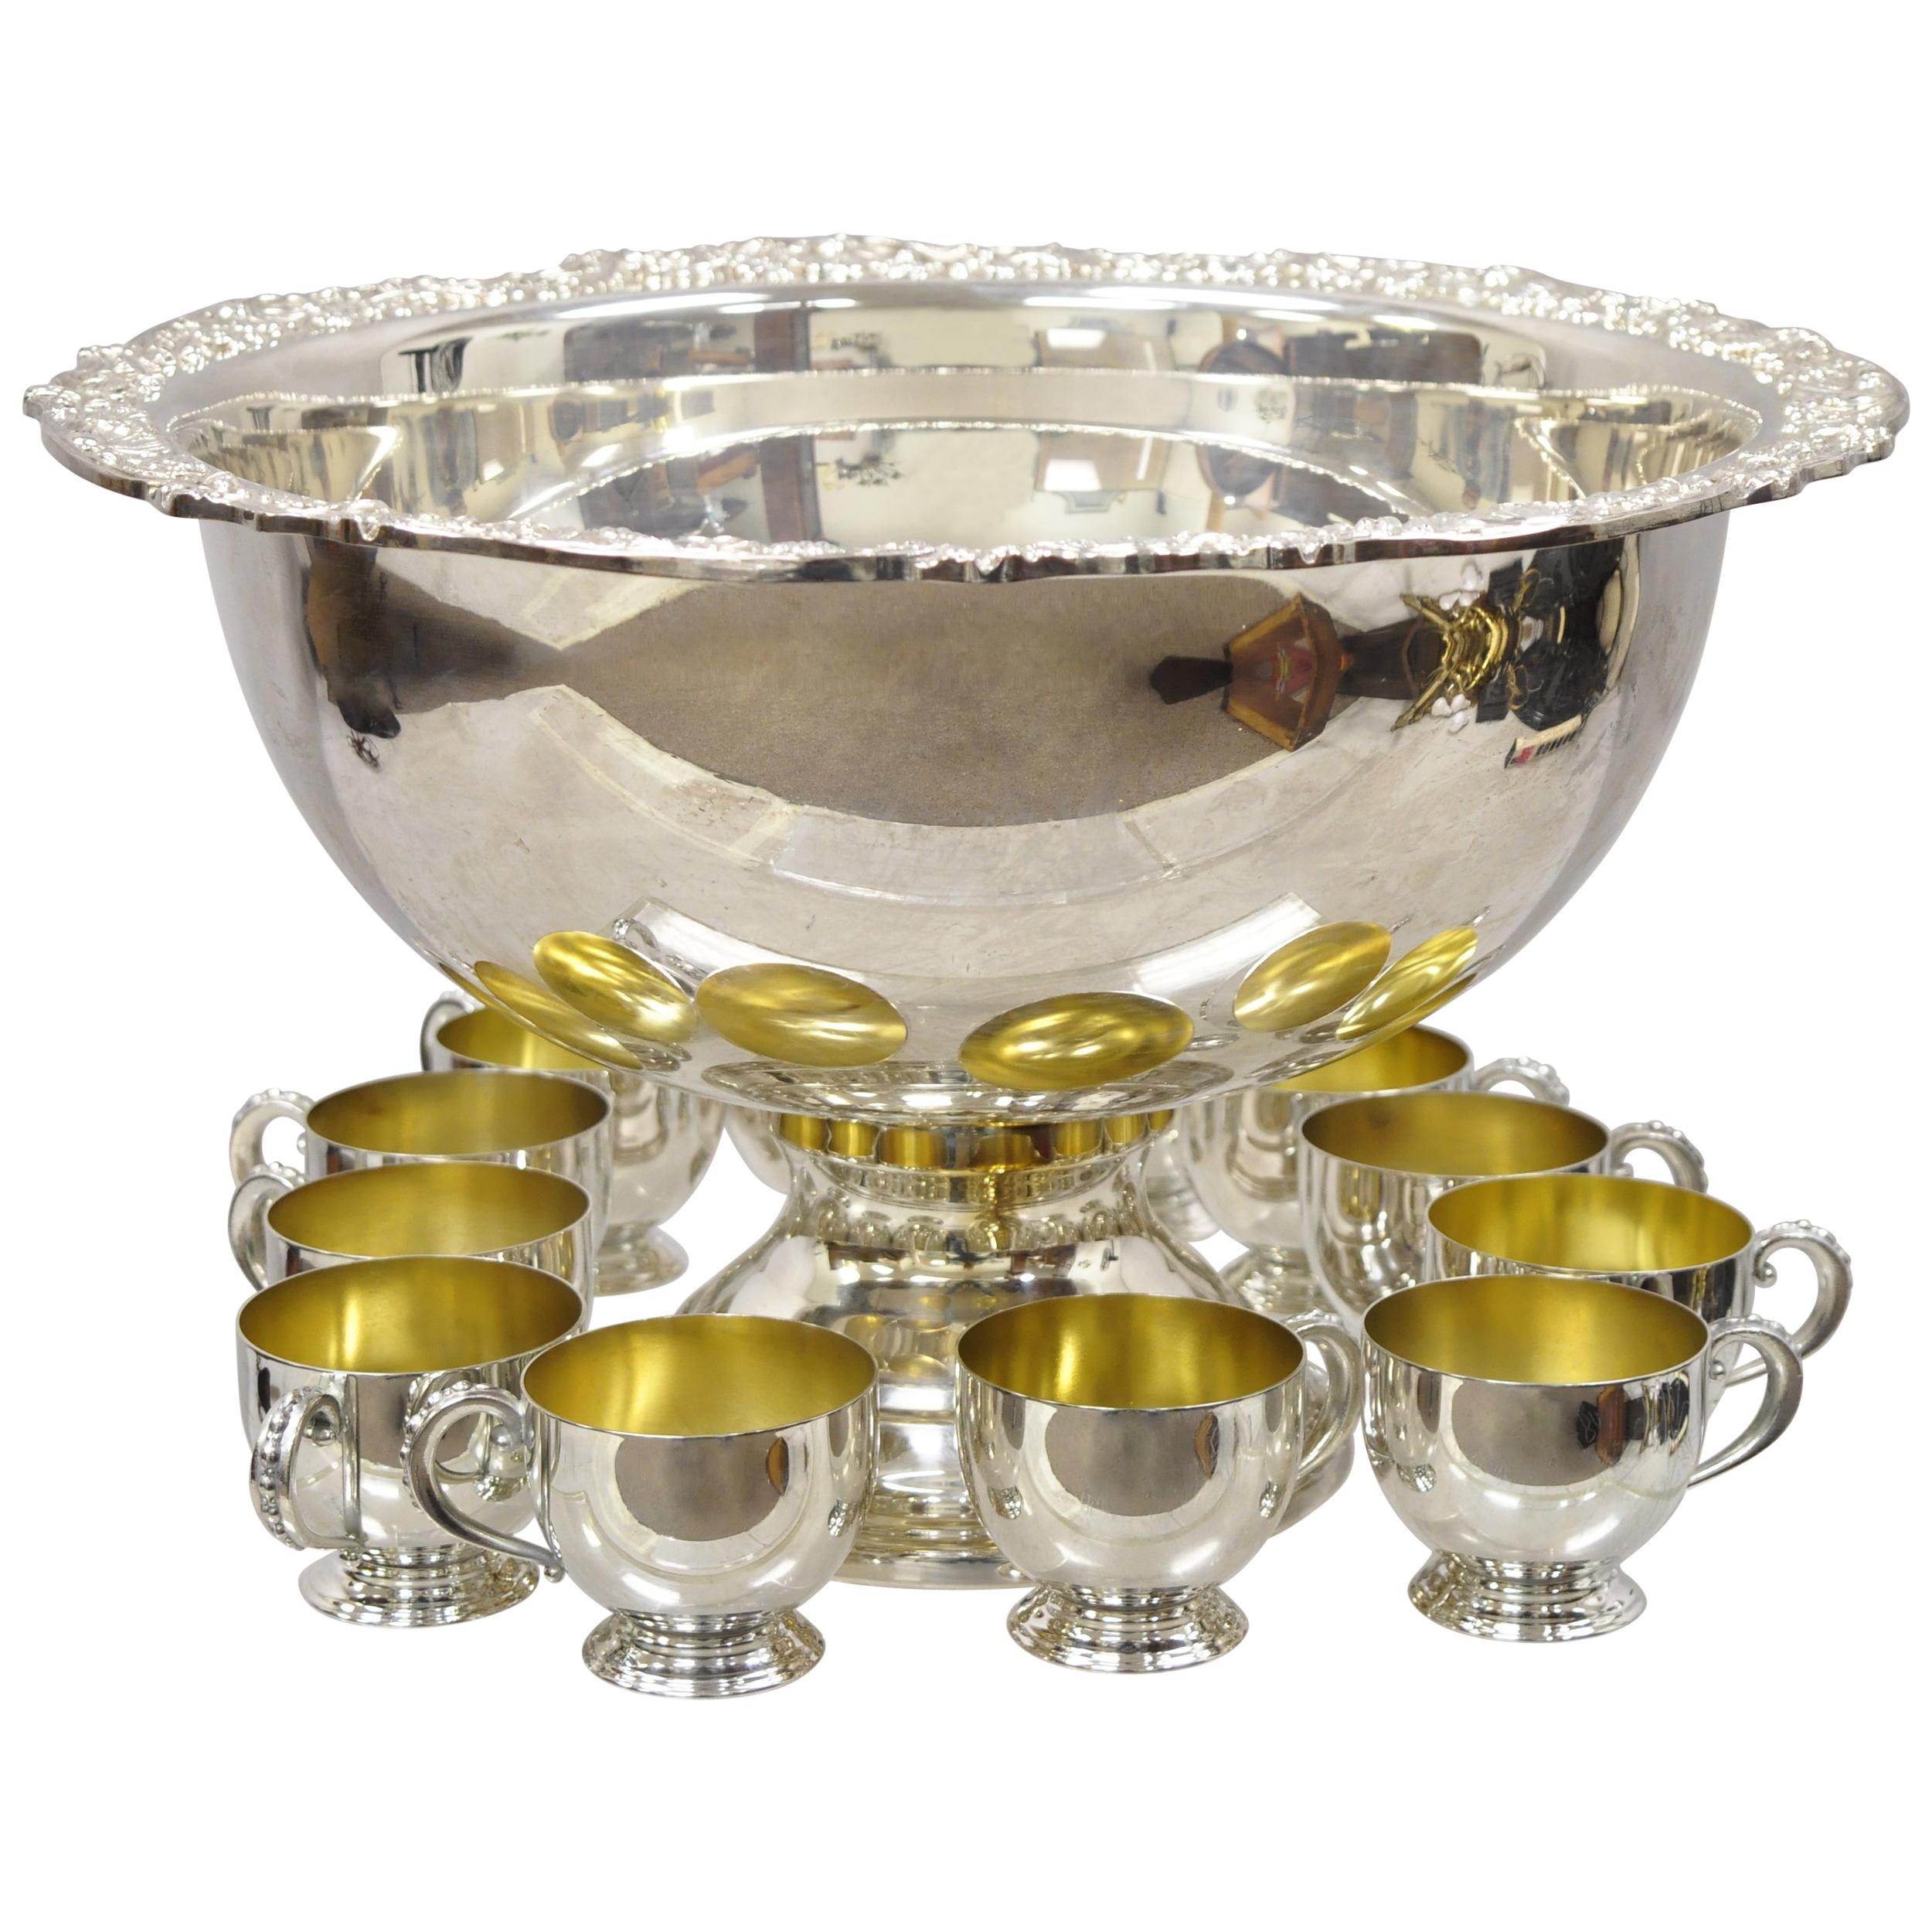 Towle Silver Plated Punch Bowl Set Flower Shell Rim with 12 Cups